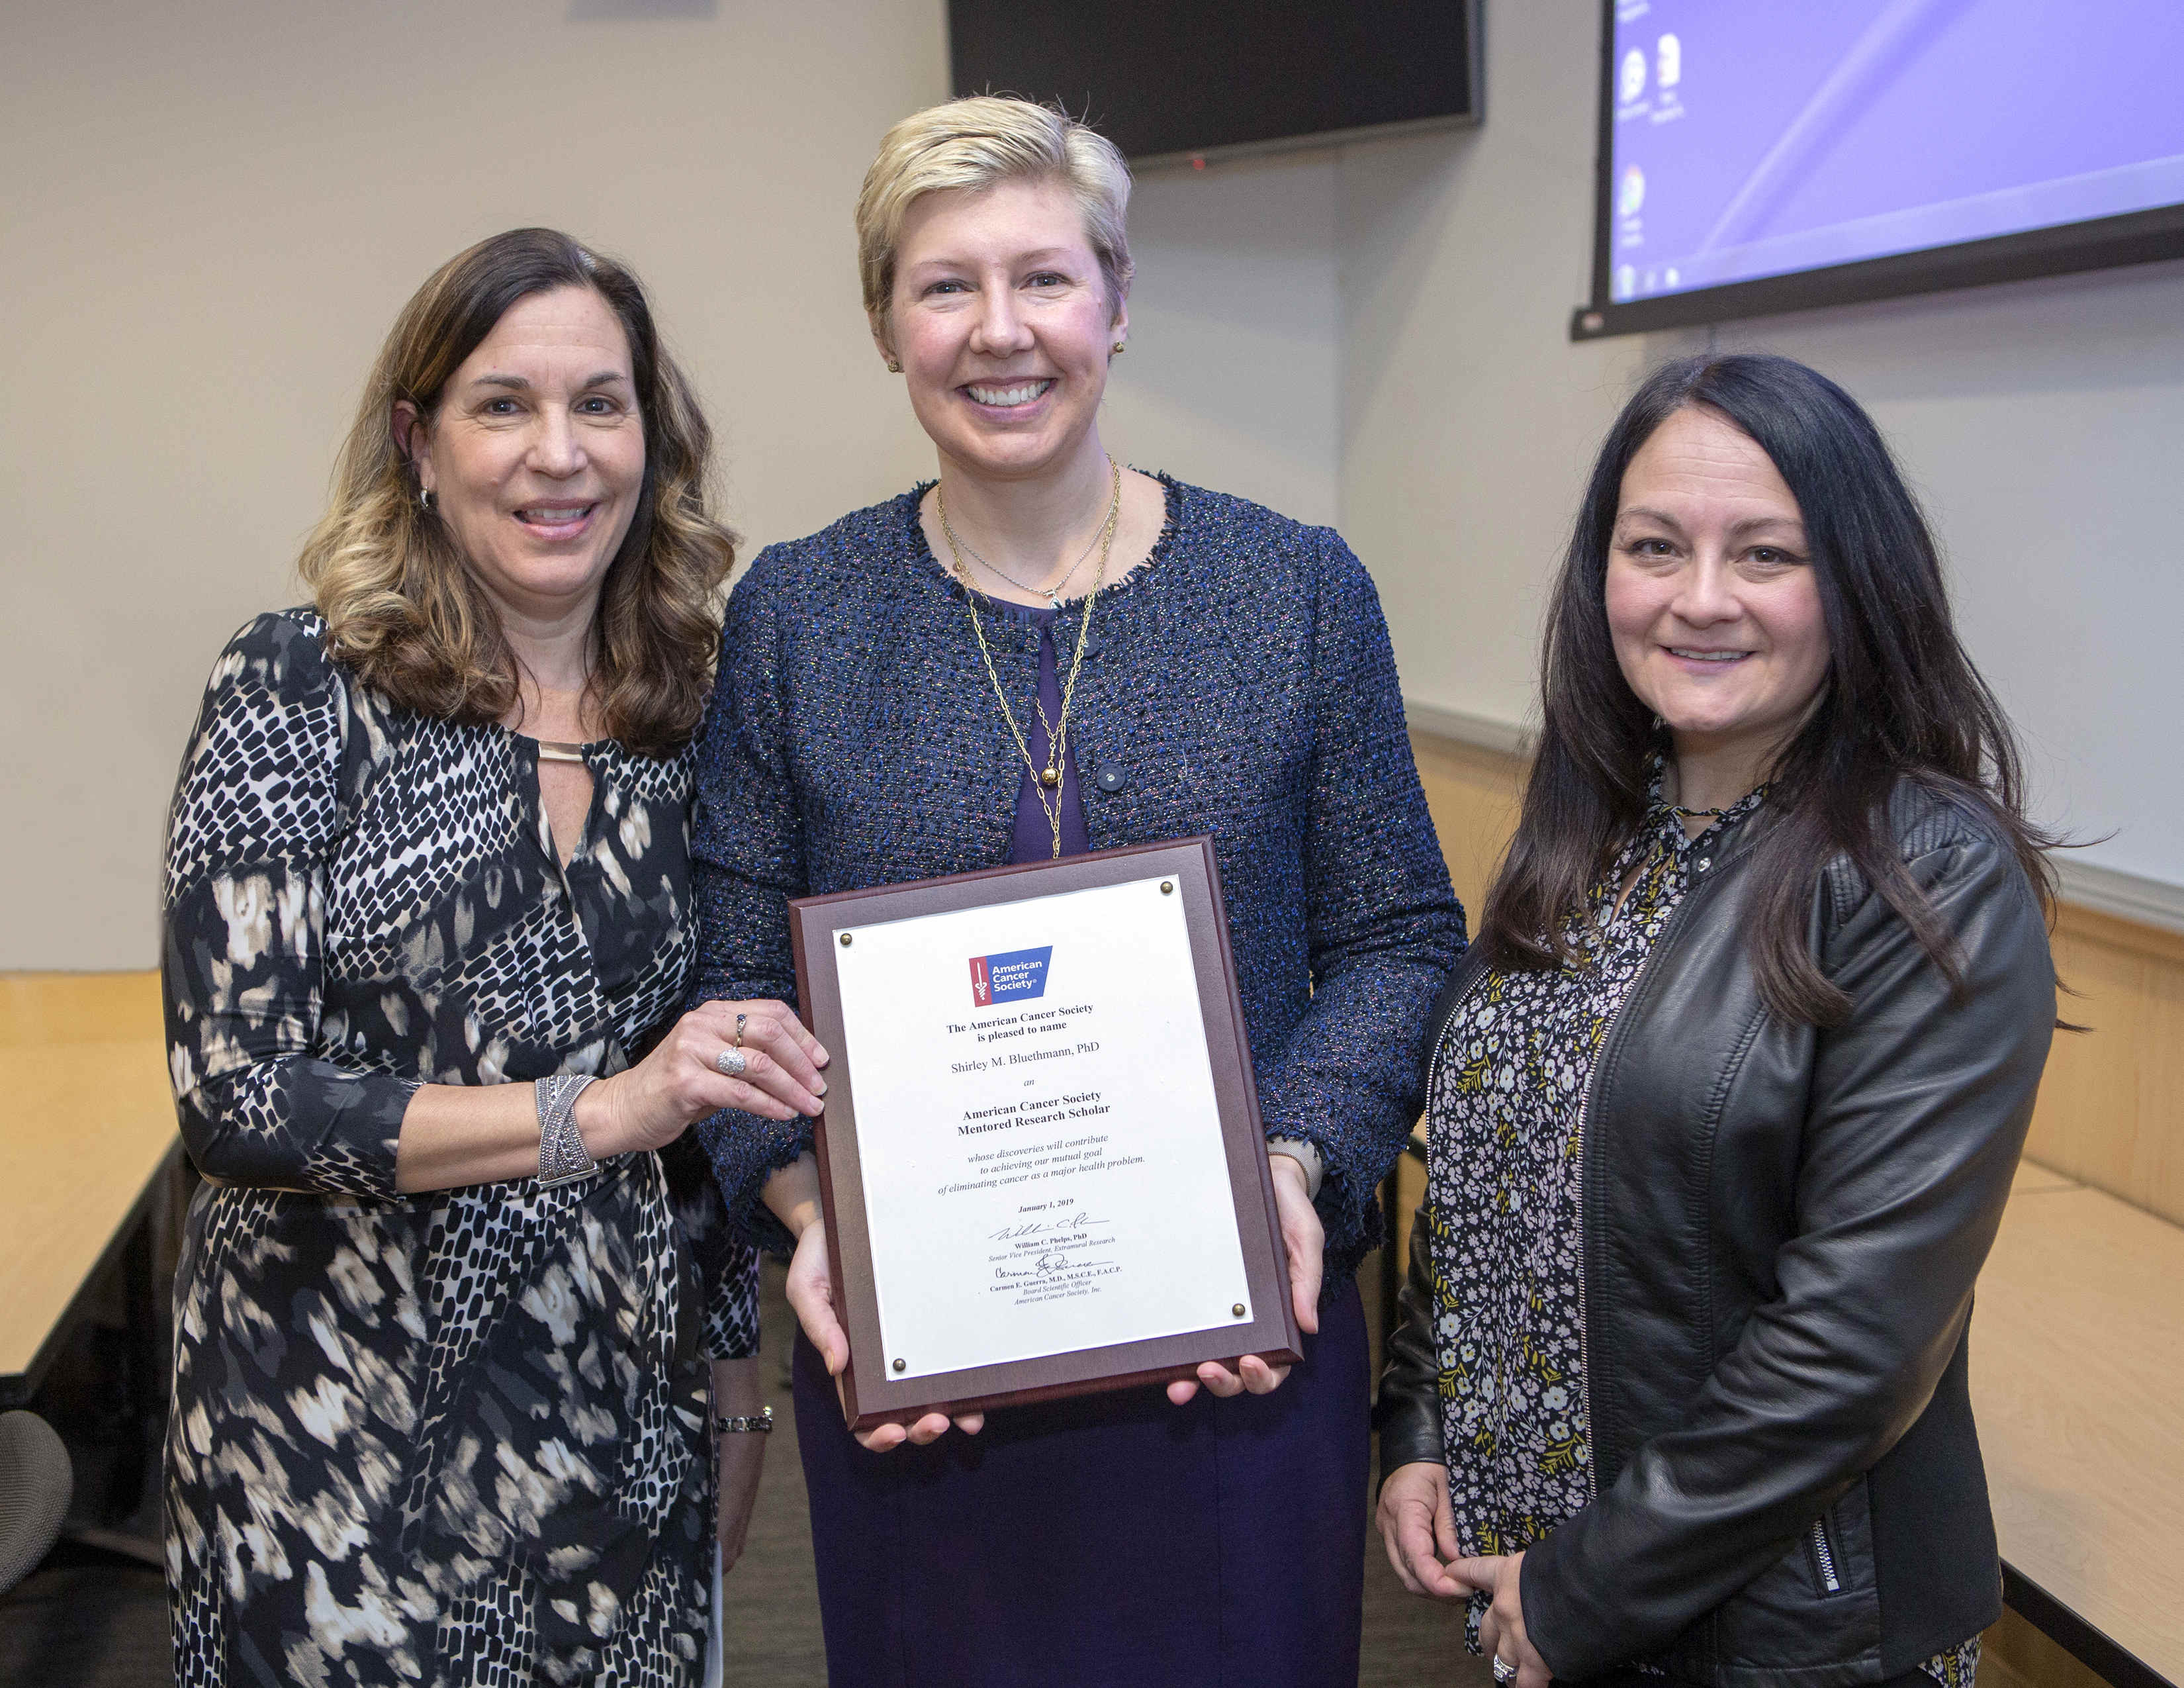 Three women in professional attire pose for a photo in a conference room. The woman in the middle holds a framed certificate bearing the American Cancer Society logo. A portion of a table and parts of two wall-mounted video monitors are in the background.